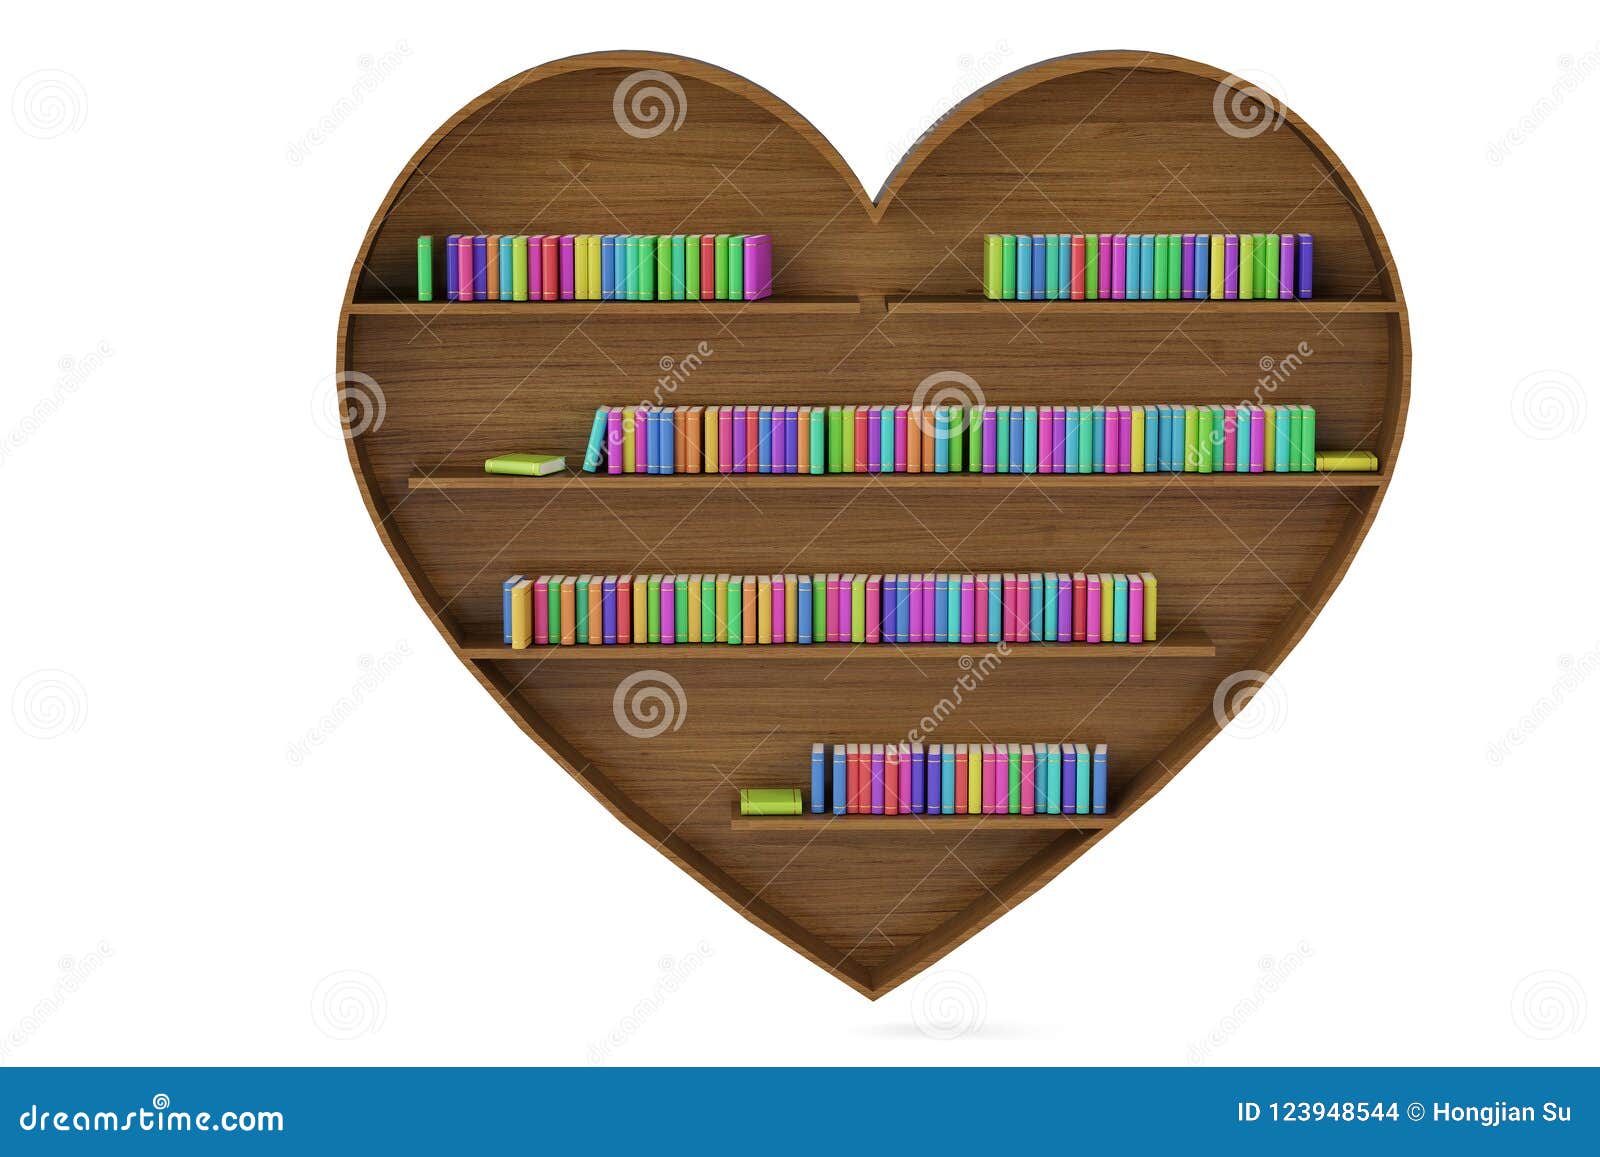 Heart Shaped Bookshelf and Colorful Book Stacks on White Background.3D ...